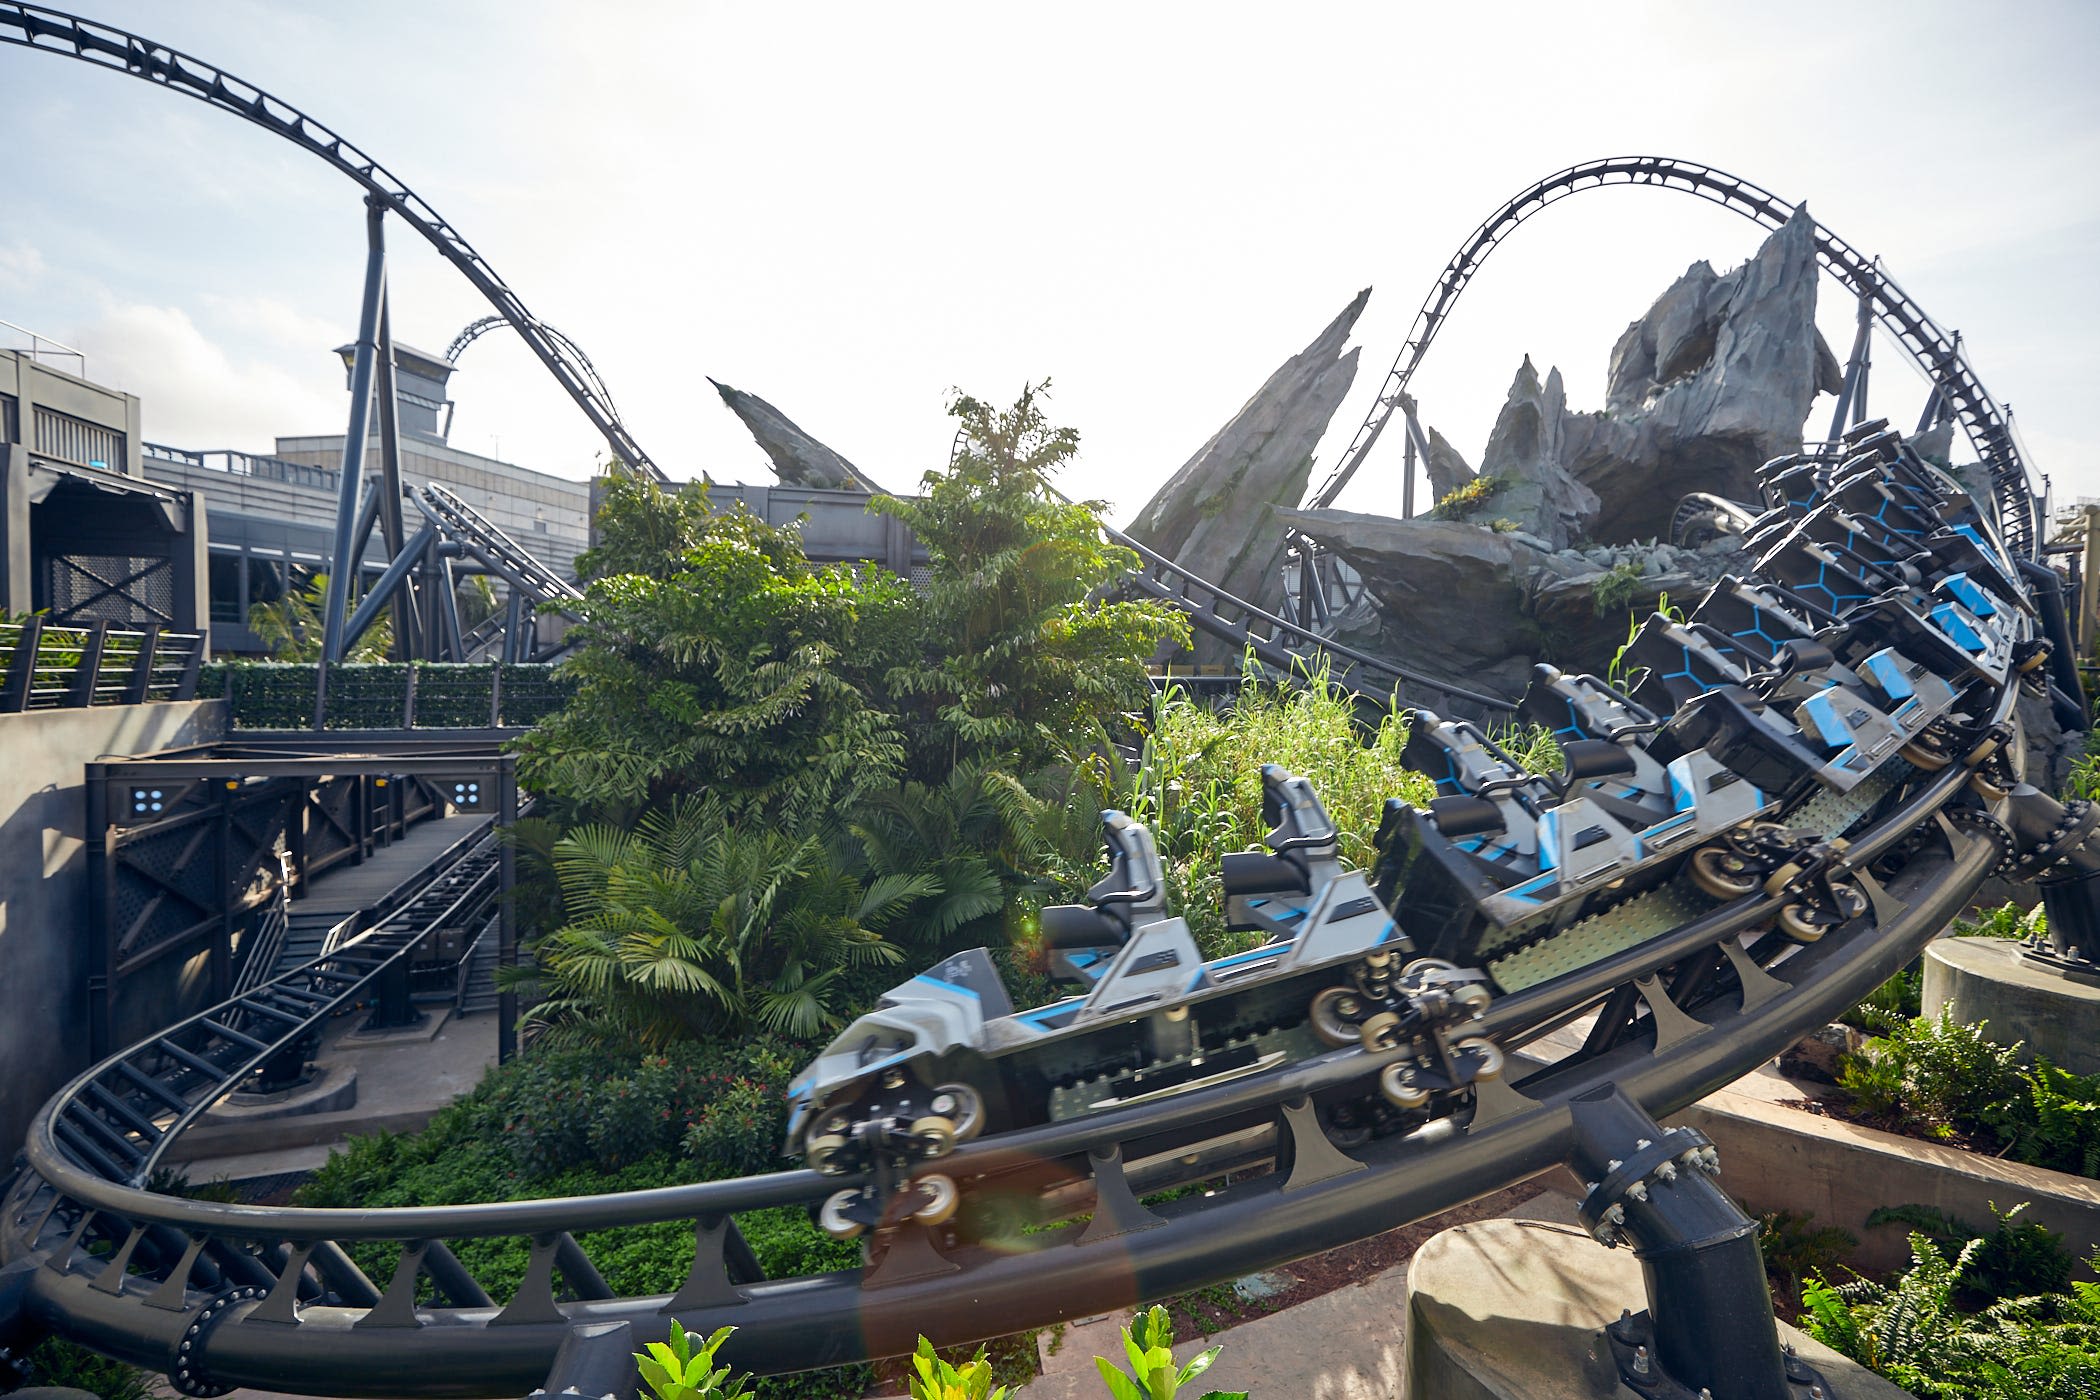 What's the best rollercoaster in Florida? Vote for your favorite among these Elite 8!